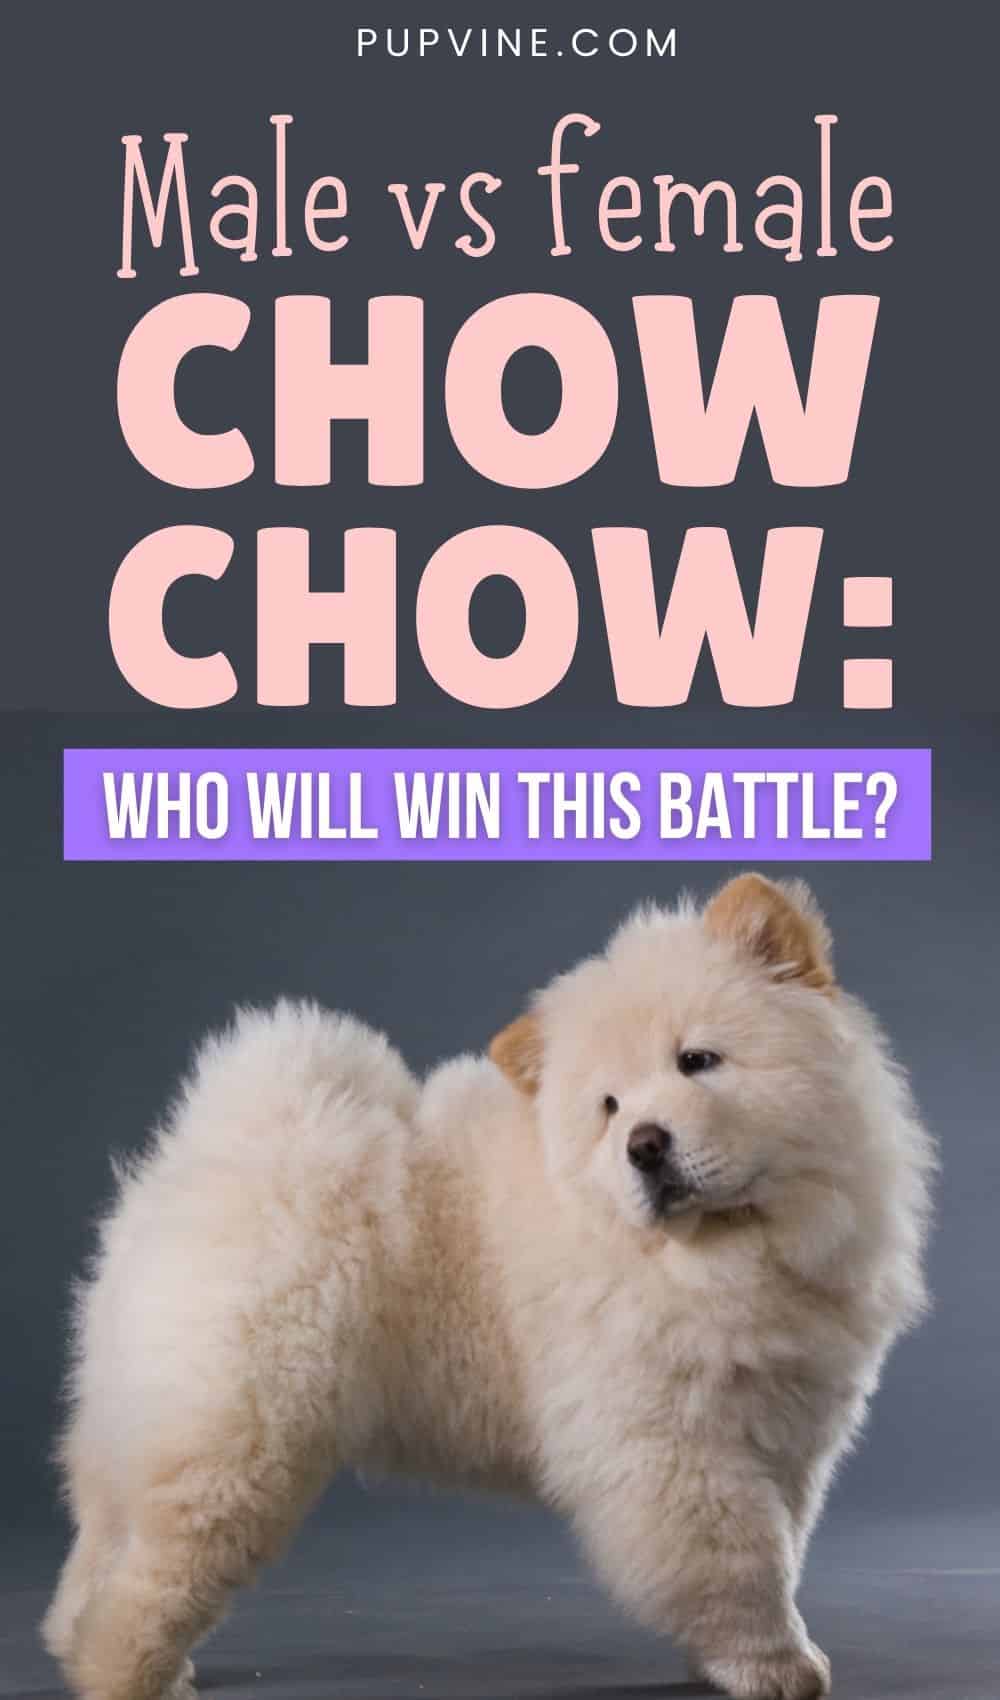 Male Vs Female Chow Chow Who Will Win This Battle